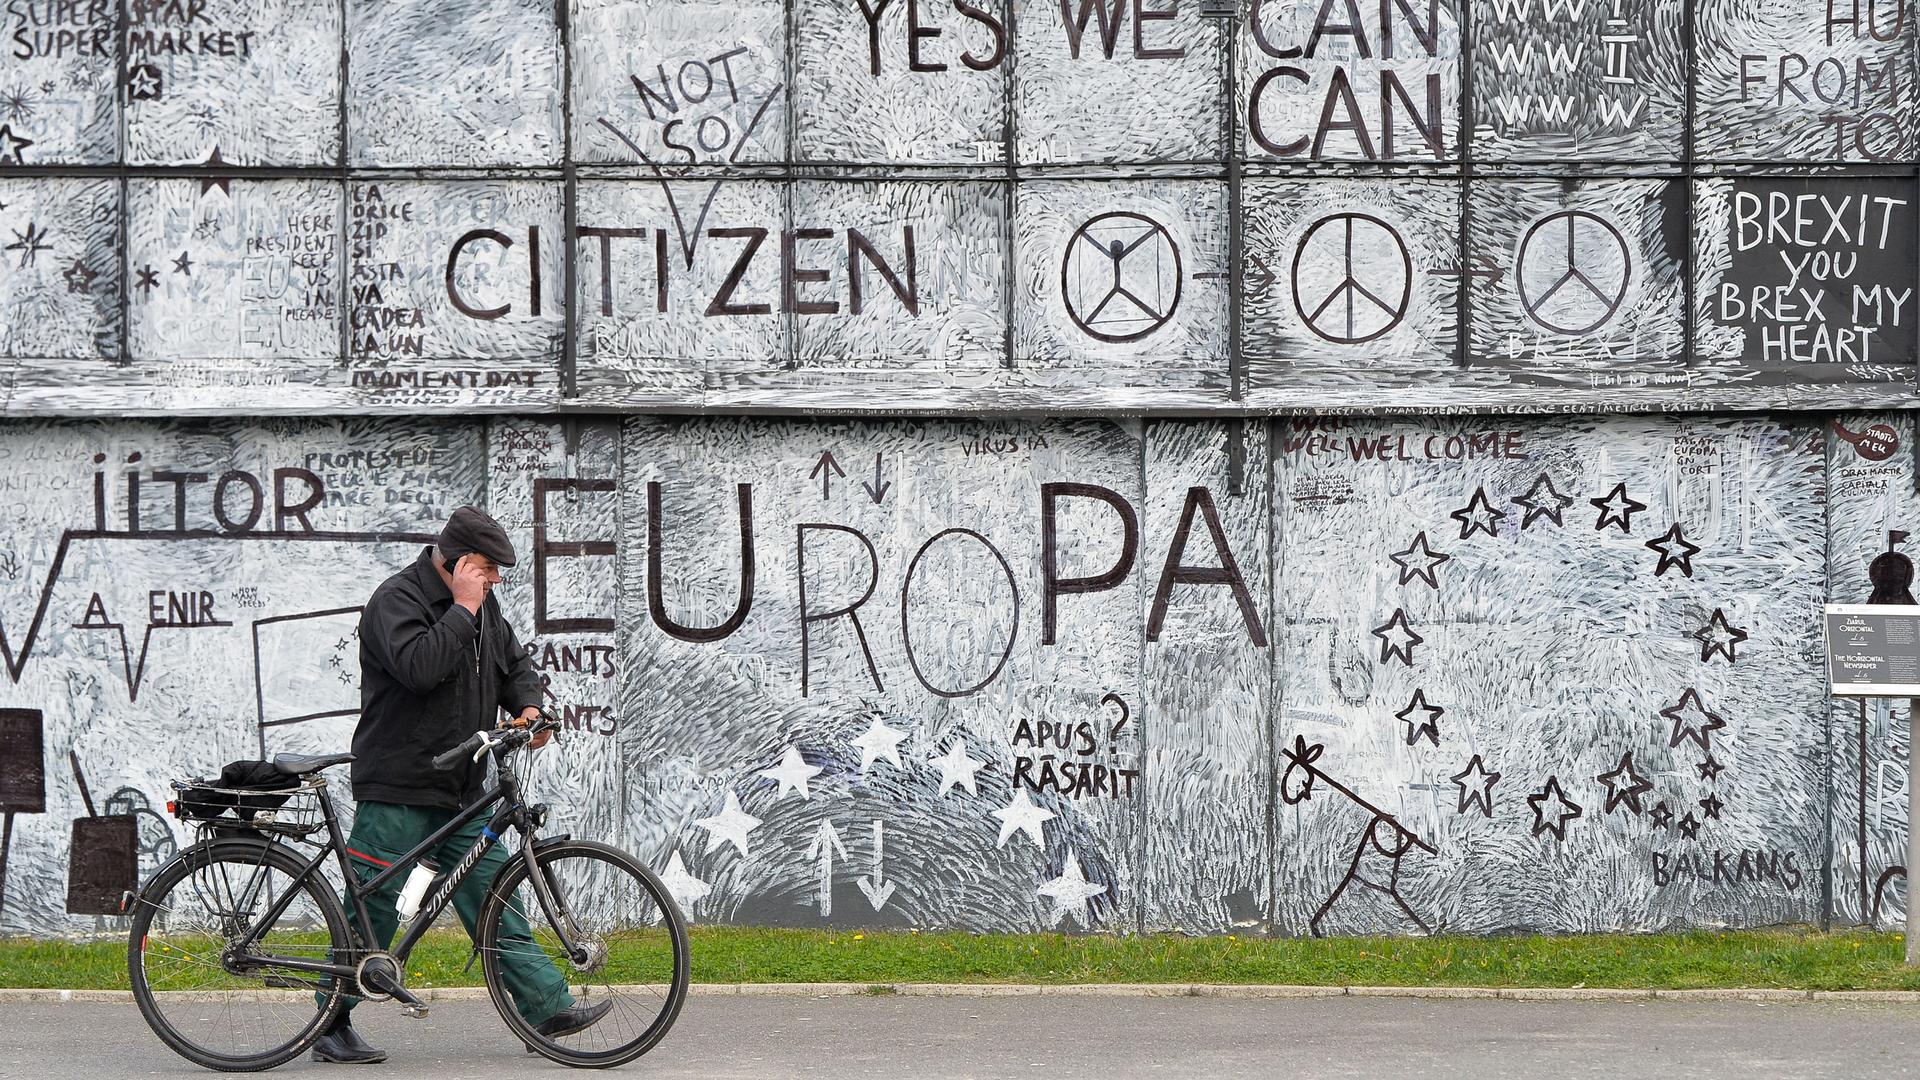 A man passes by a wall displaying an urban art project in the Transylvanian town of Sibiu, Romania, Wednesday, May 8, 2019. 